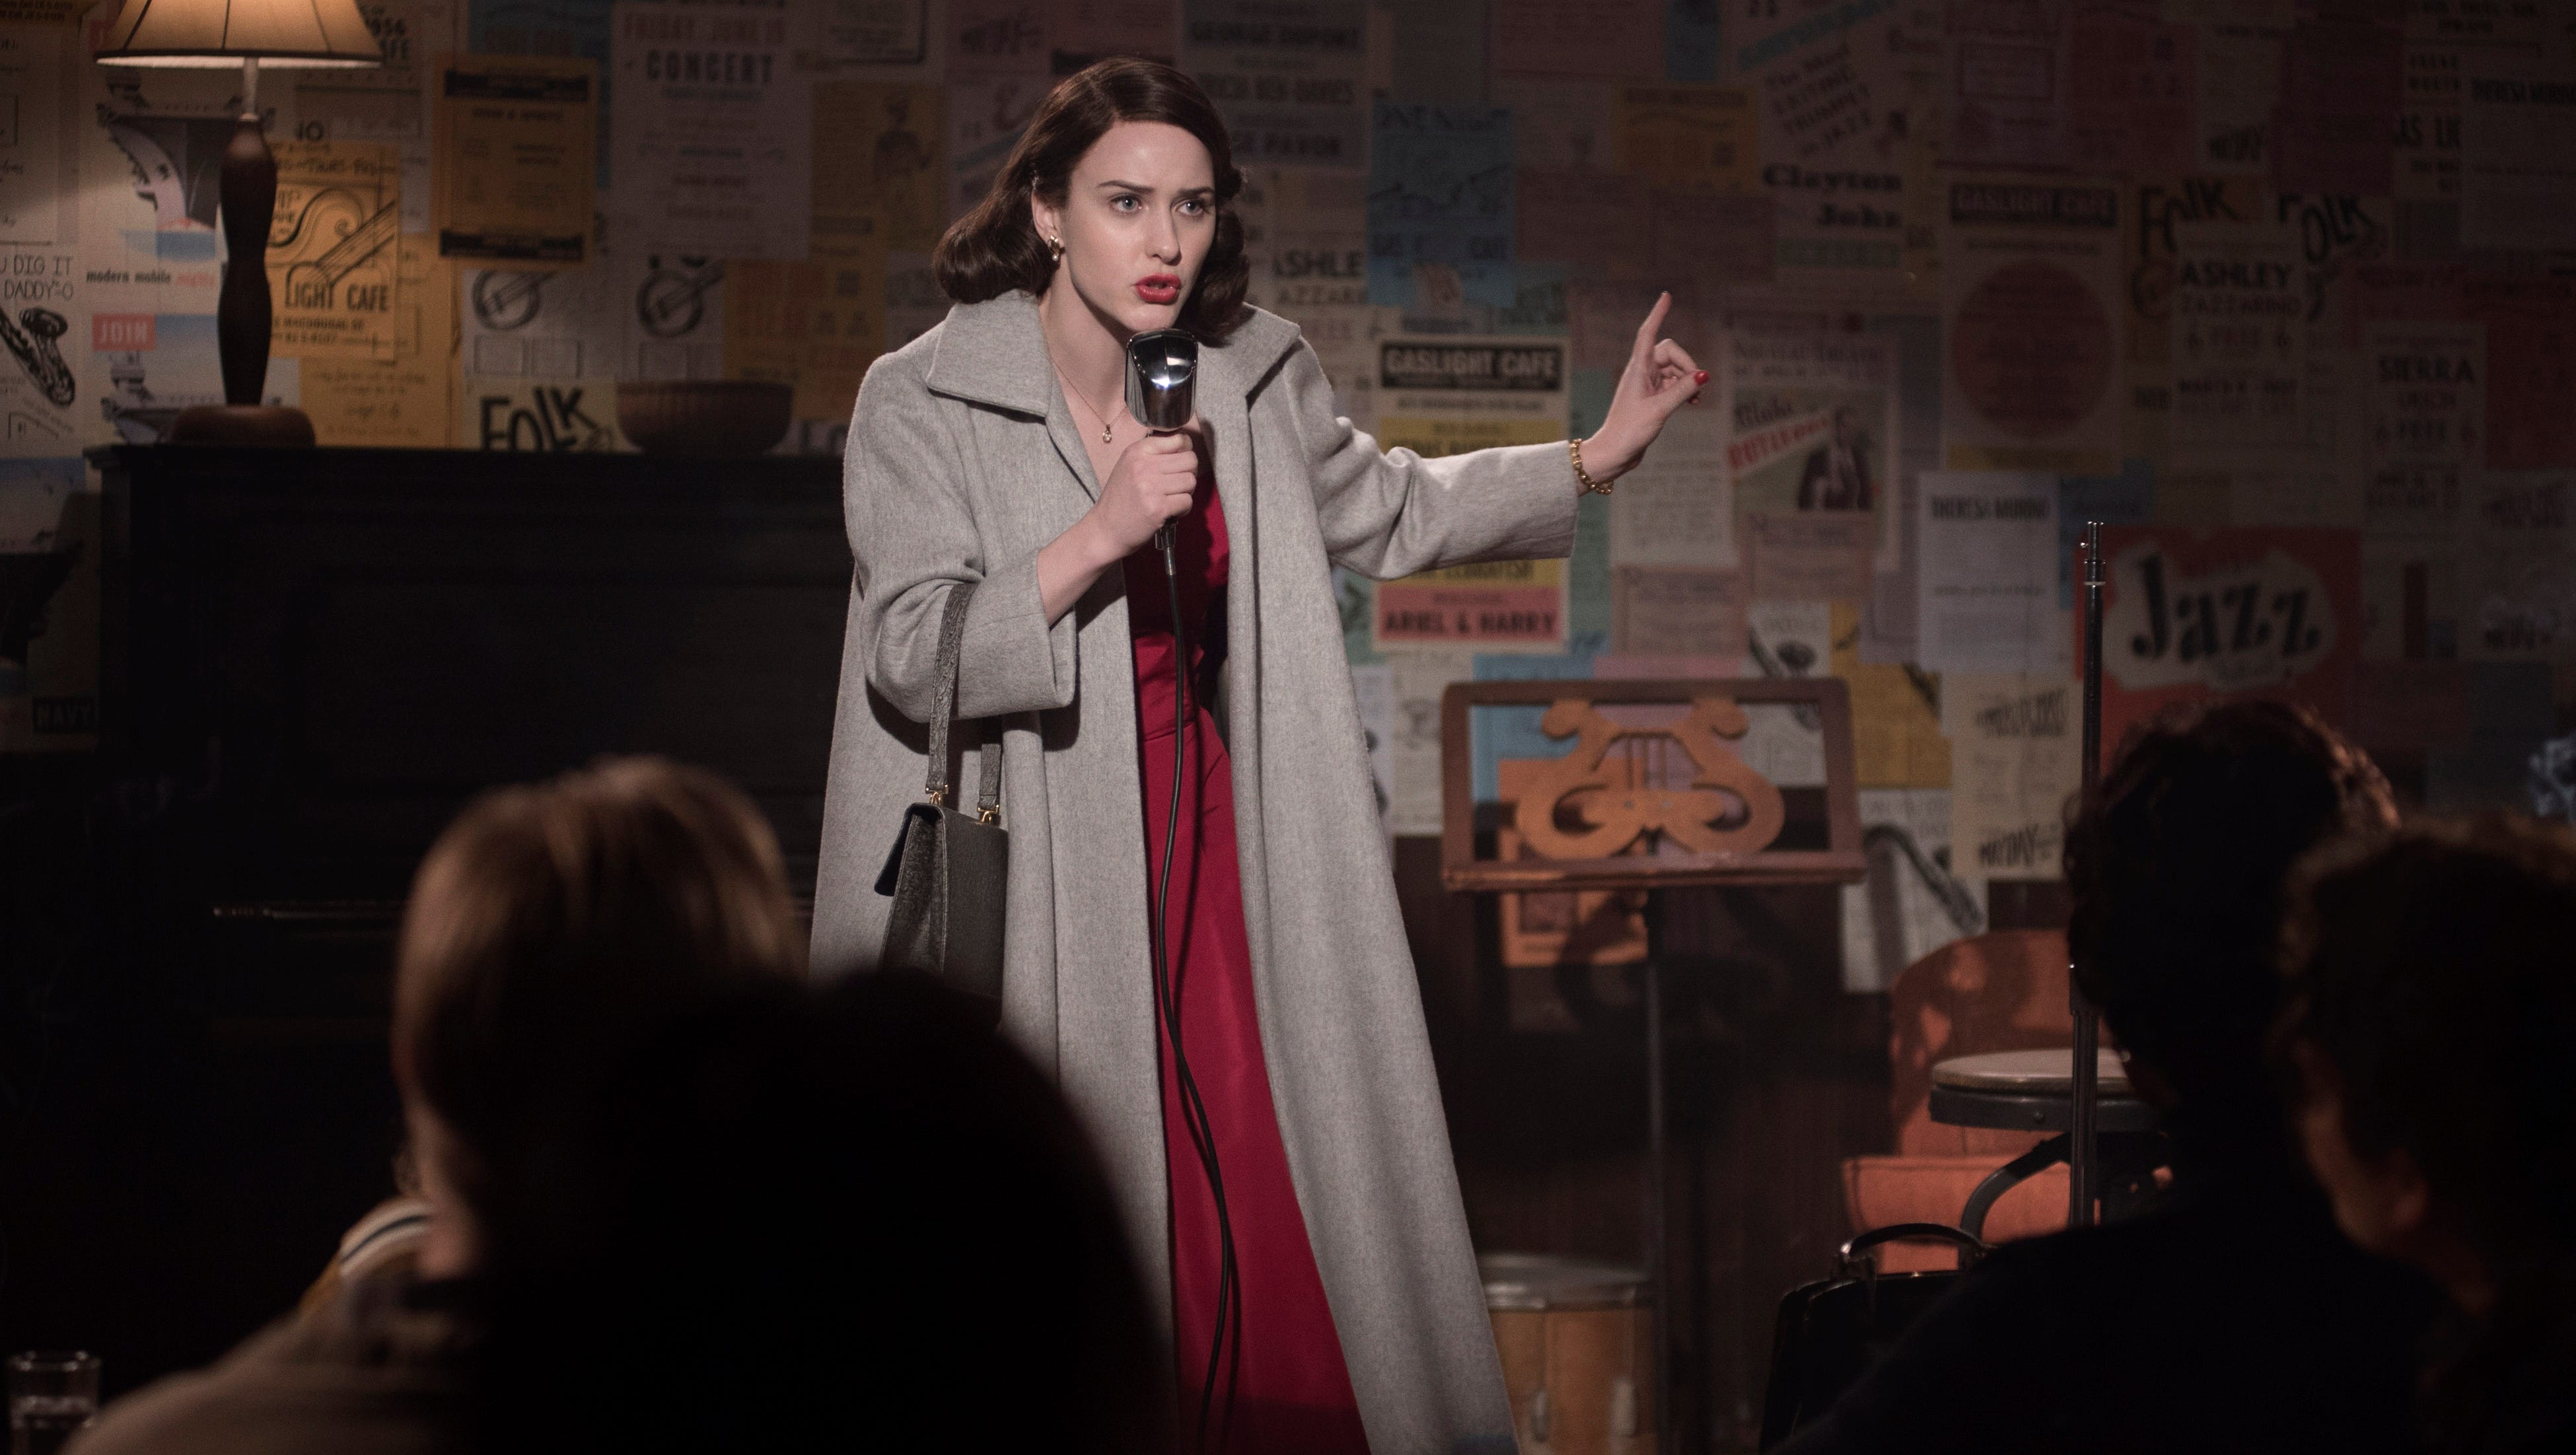 The Marvelous Mrs. Maisel' Season 2: 'Good things can't last long'